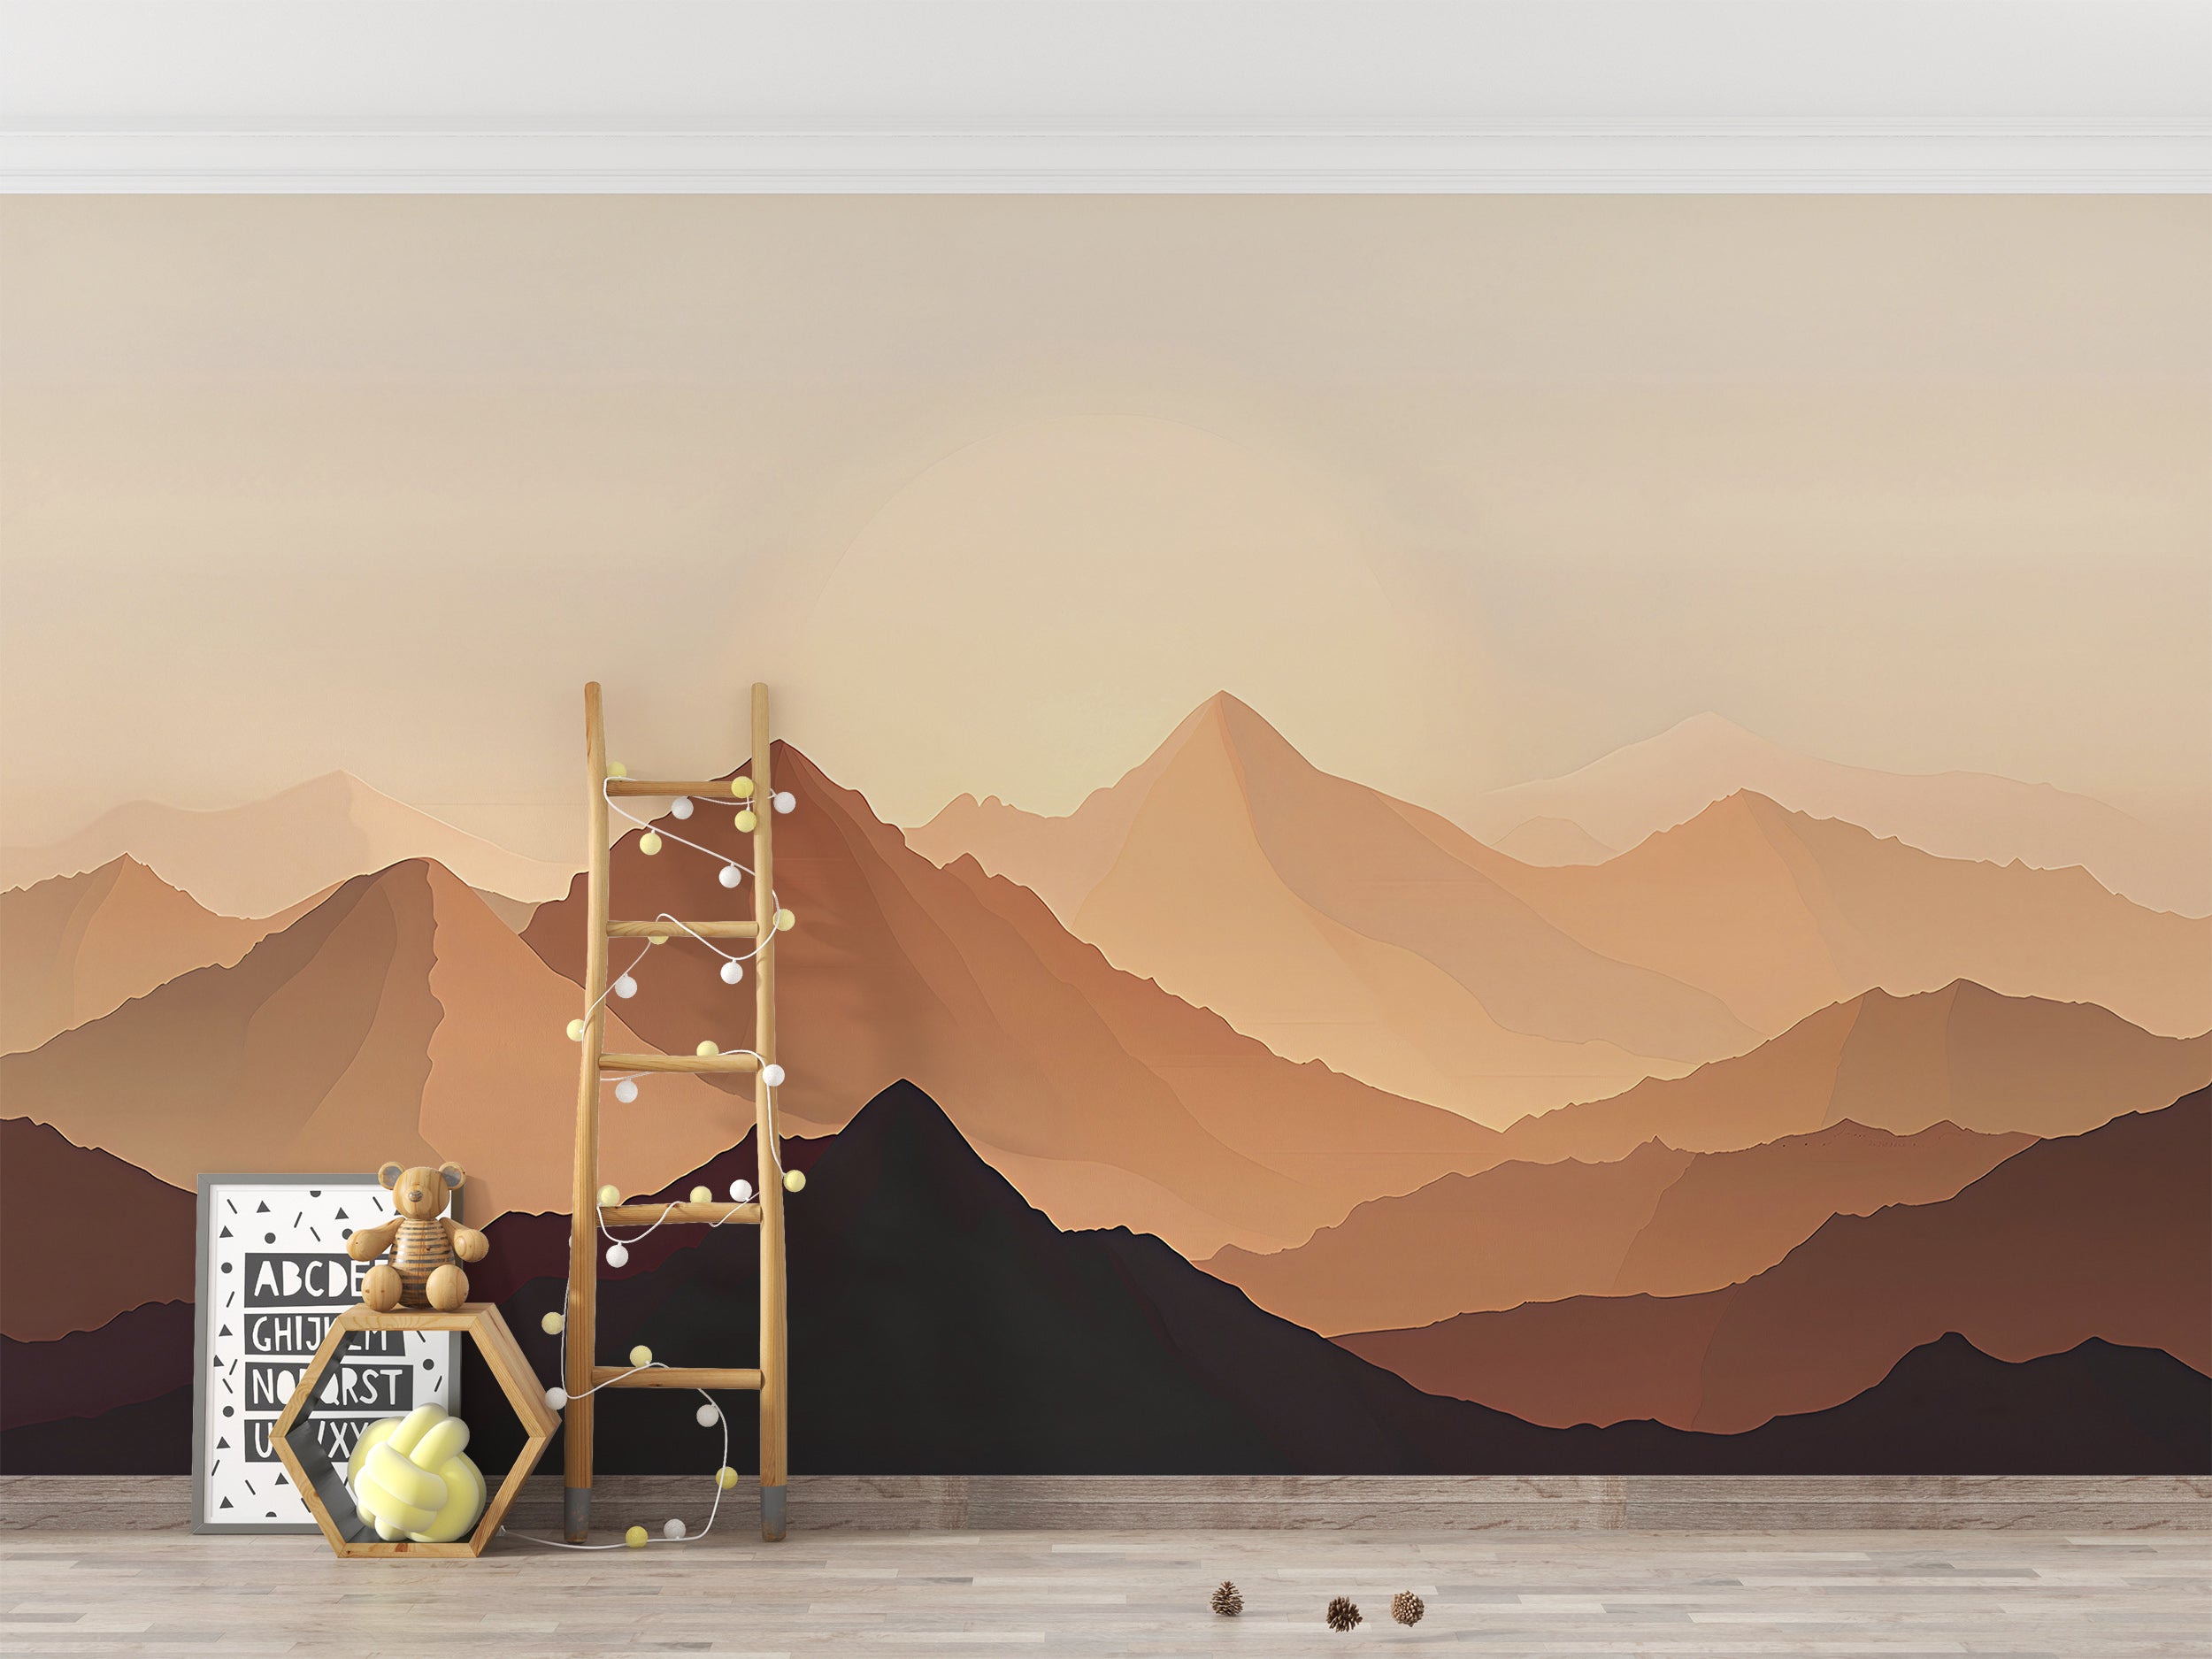 Sand Dunes Wallpaper, Peel and Stick Desert Wall Mural, Removable Beige and Brown Mountains Landscape Art, Custom Size Wall Decor